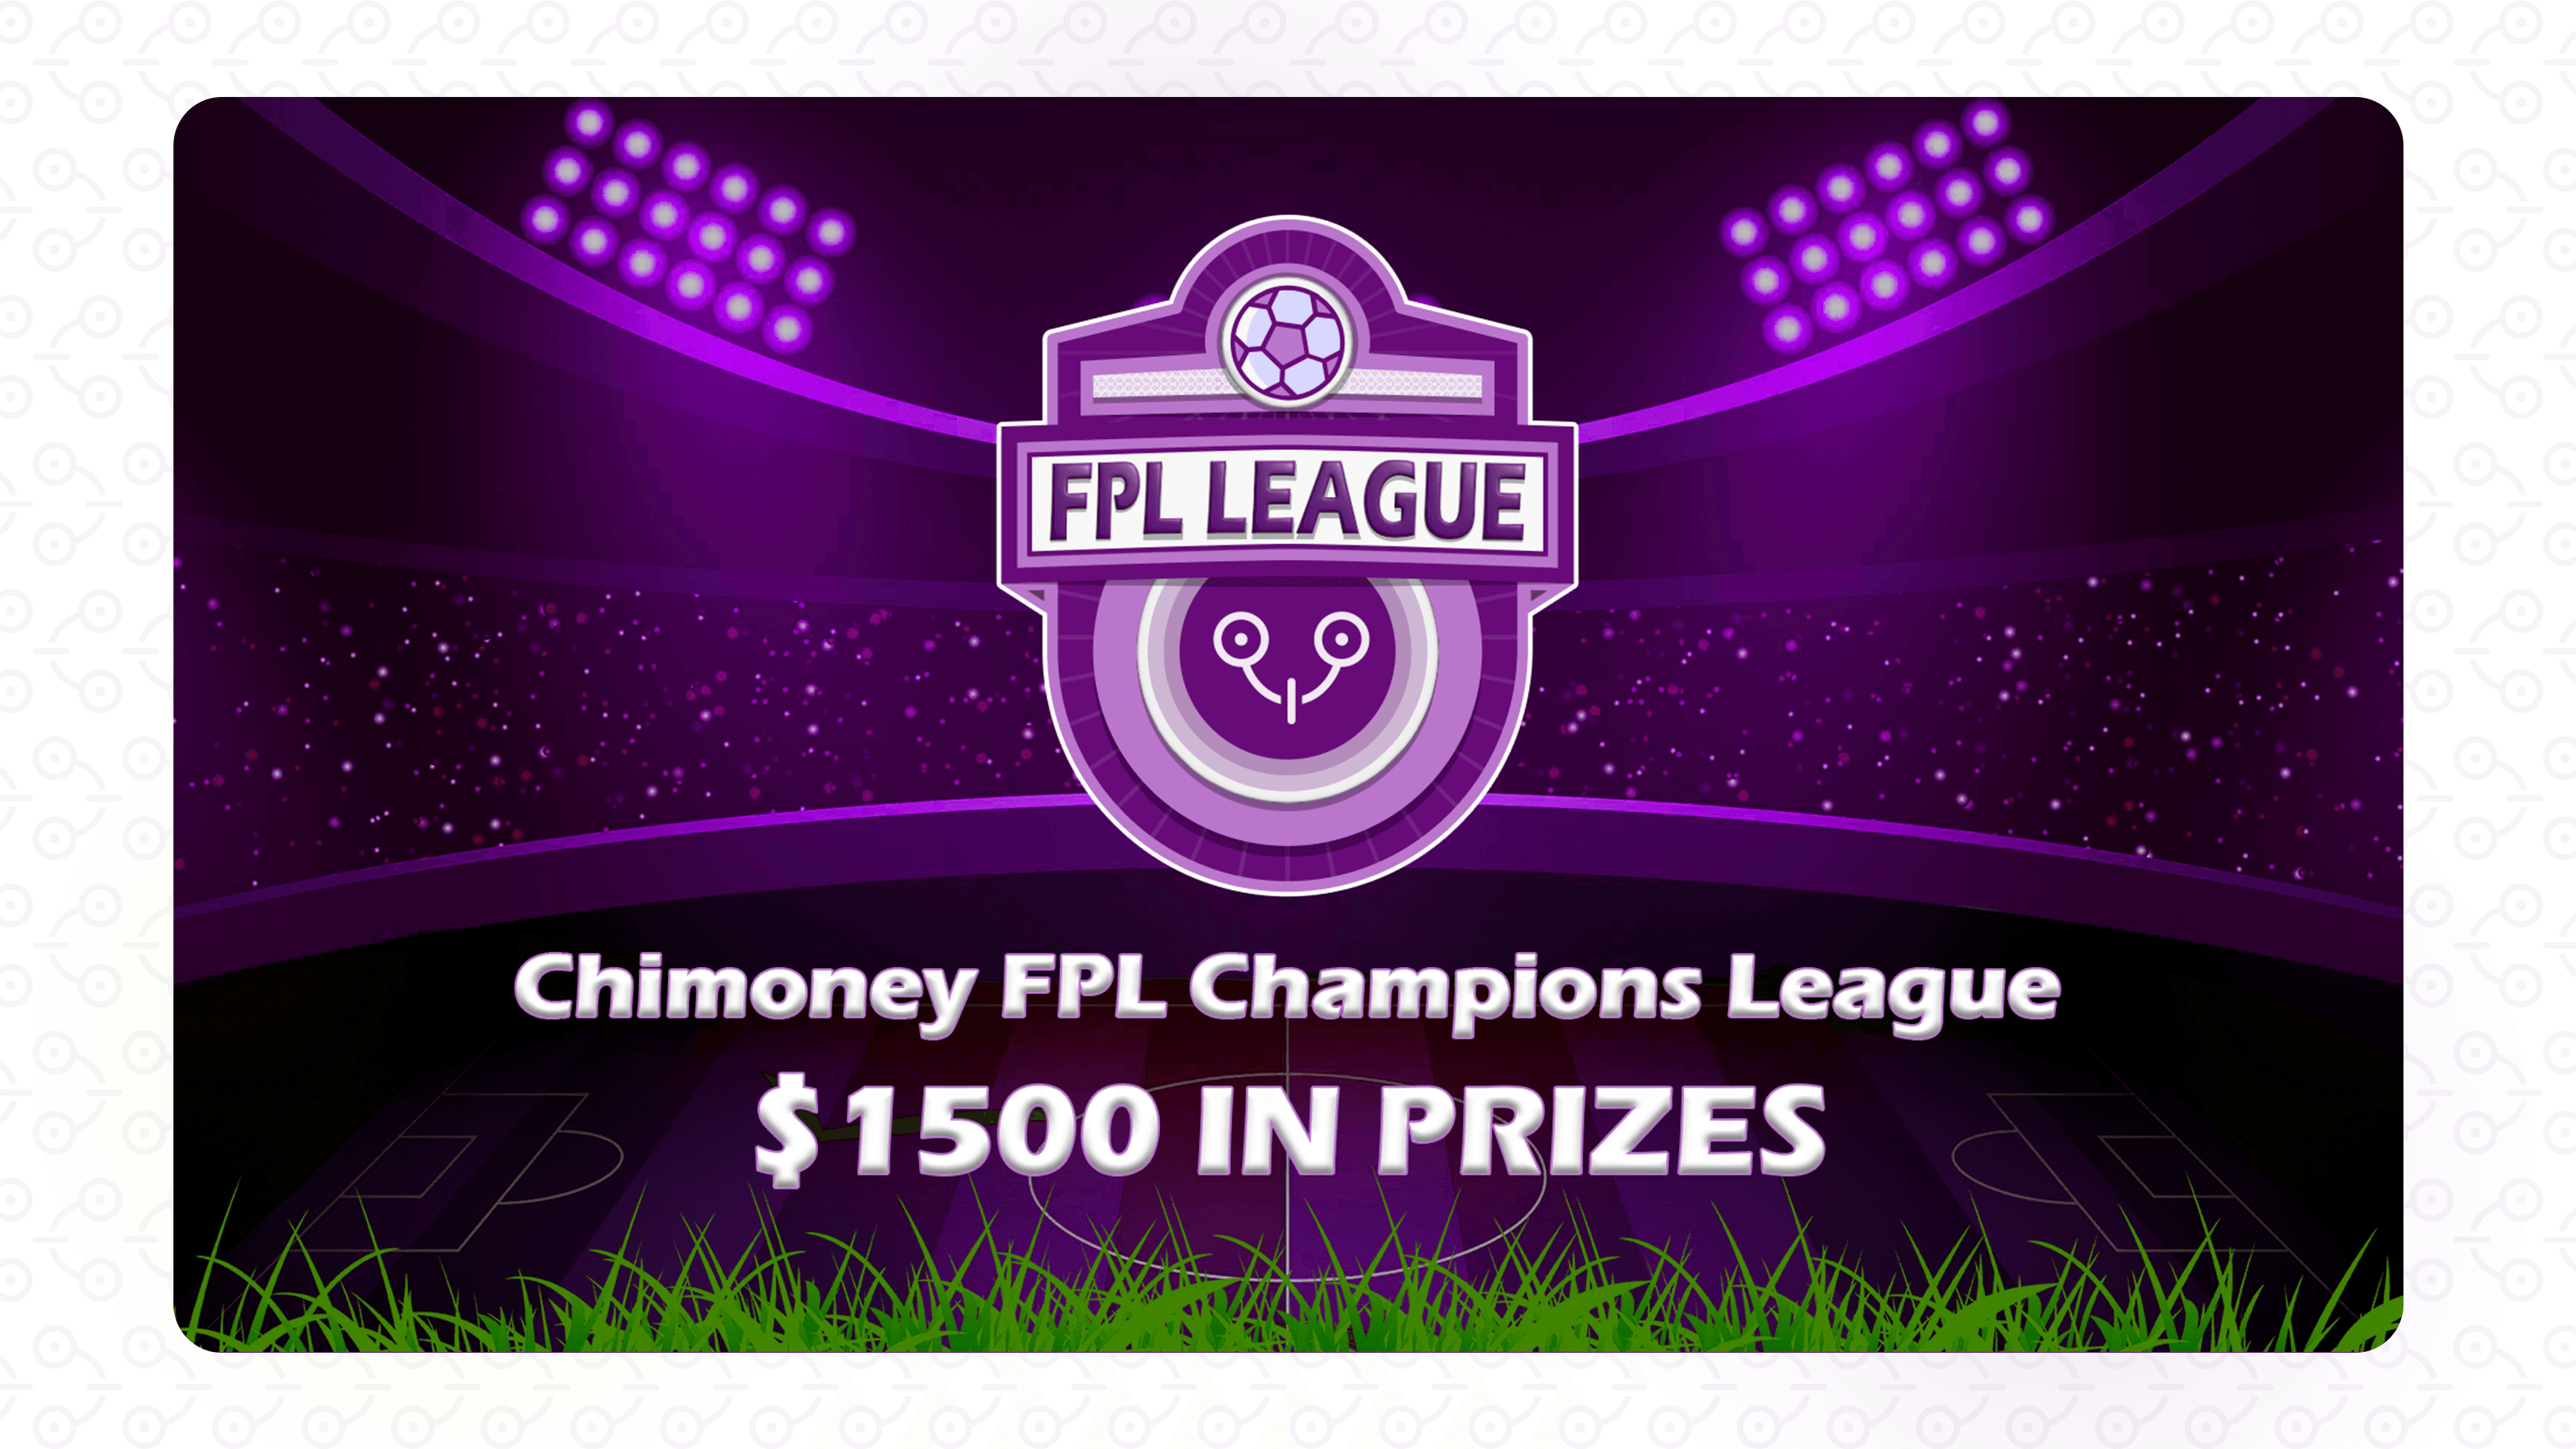 Unleash Your Fantasy Football Genius: Introducing the Chimoney FPL Champions League! ⚽🏆